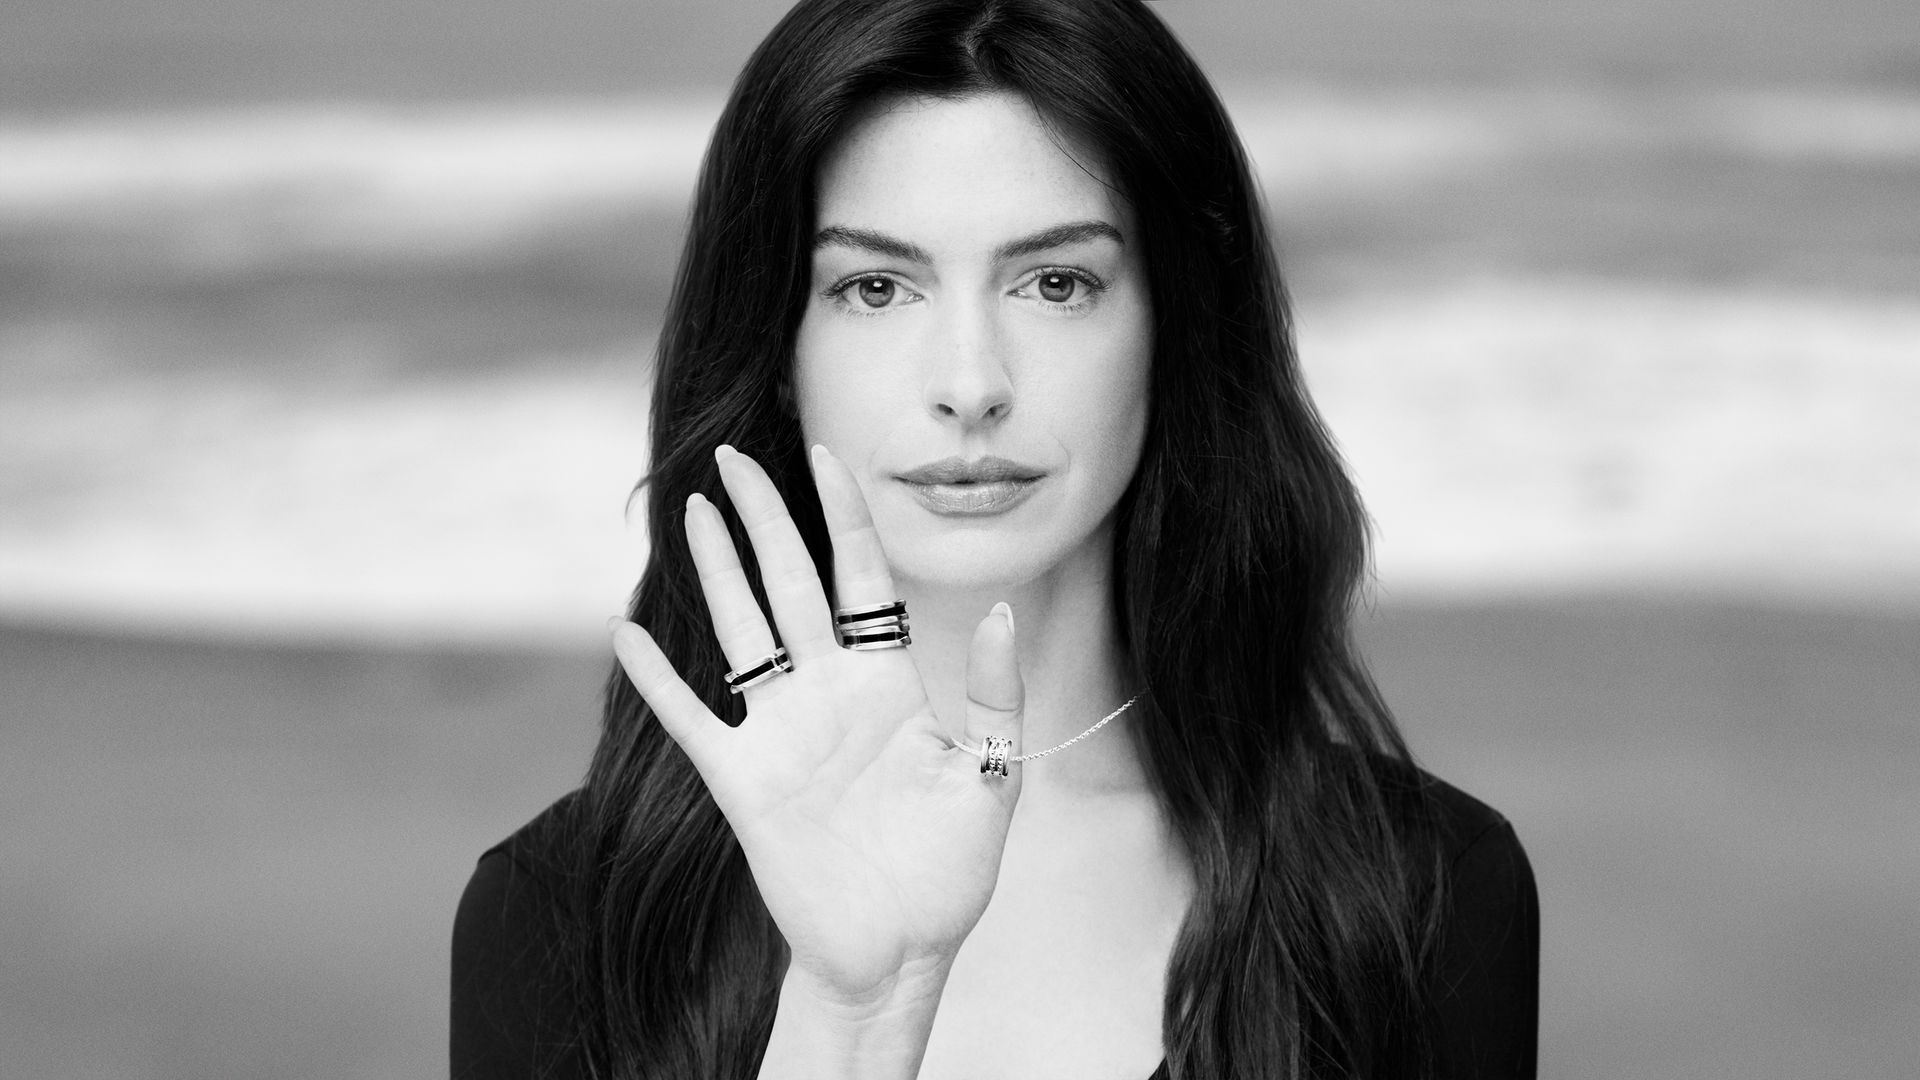 Anne Hathaway in Bulgari's newest Save the Children campaign titled ‘With Me, With You’